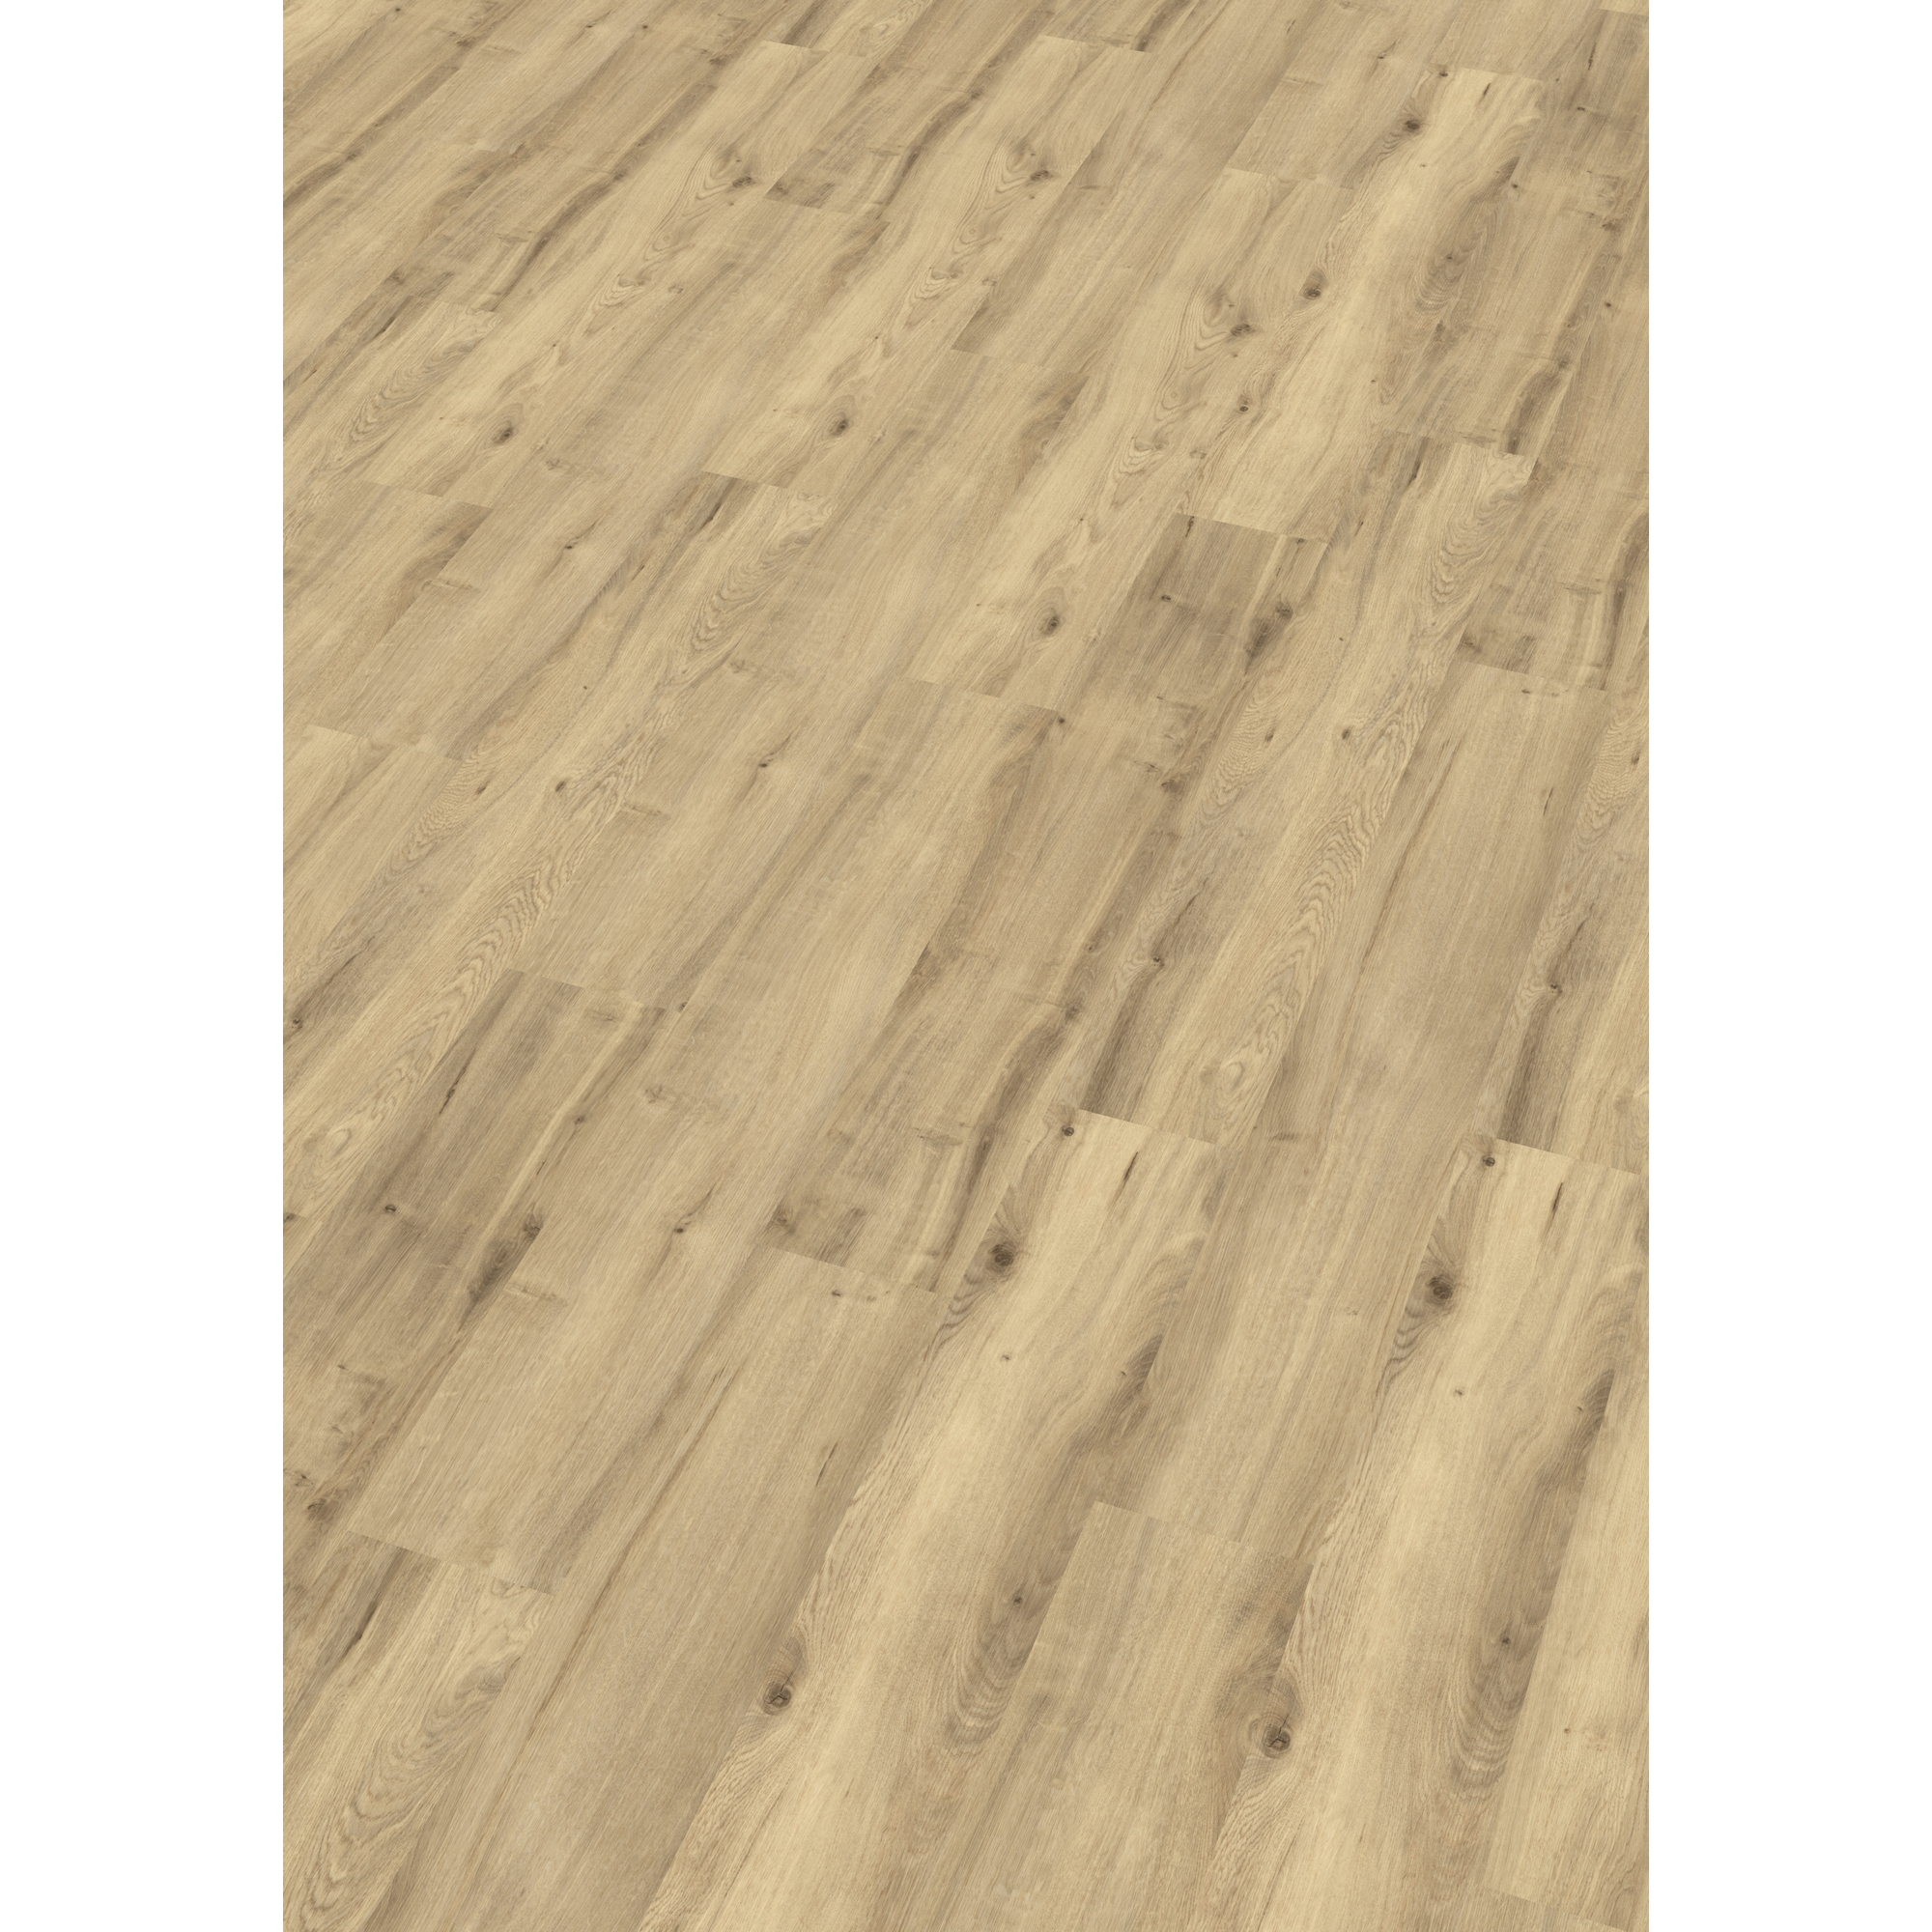 Vinylboden 'Nature' Country Oak naturbraun 10,5 mm + product picture